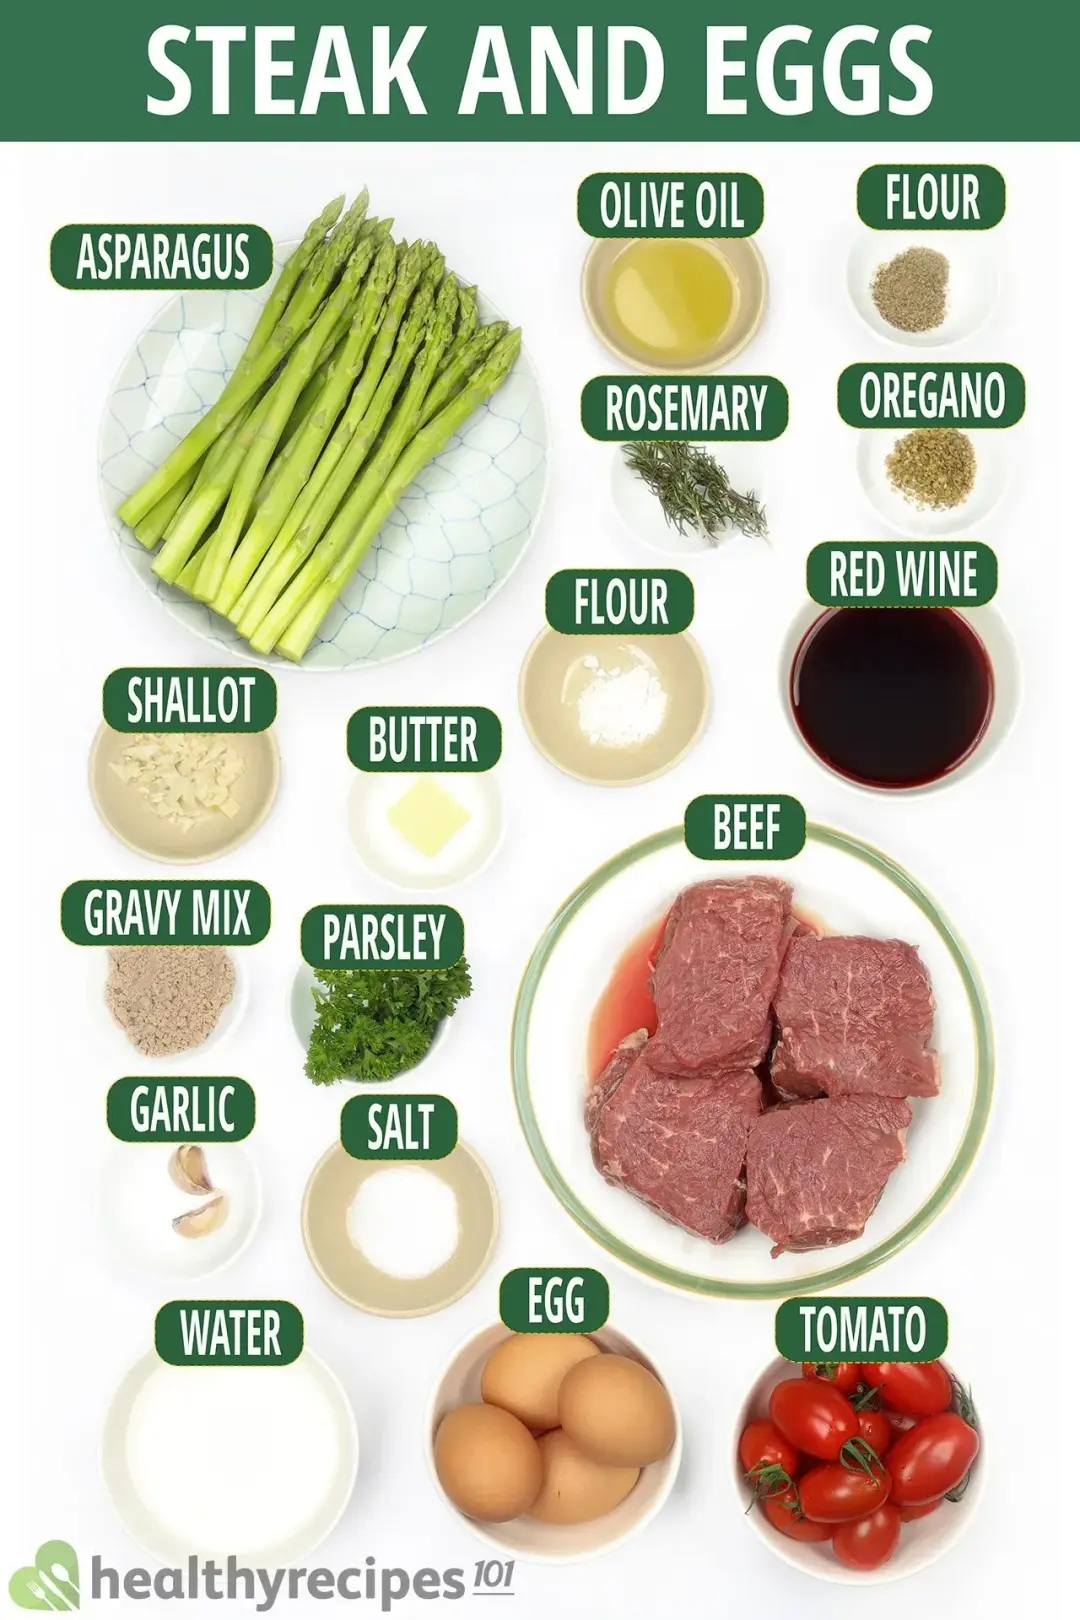 Ingredients for Steak and Eggs